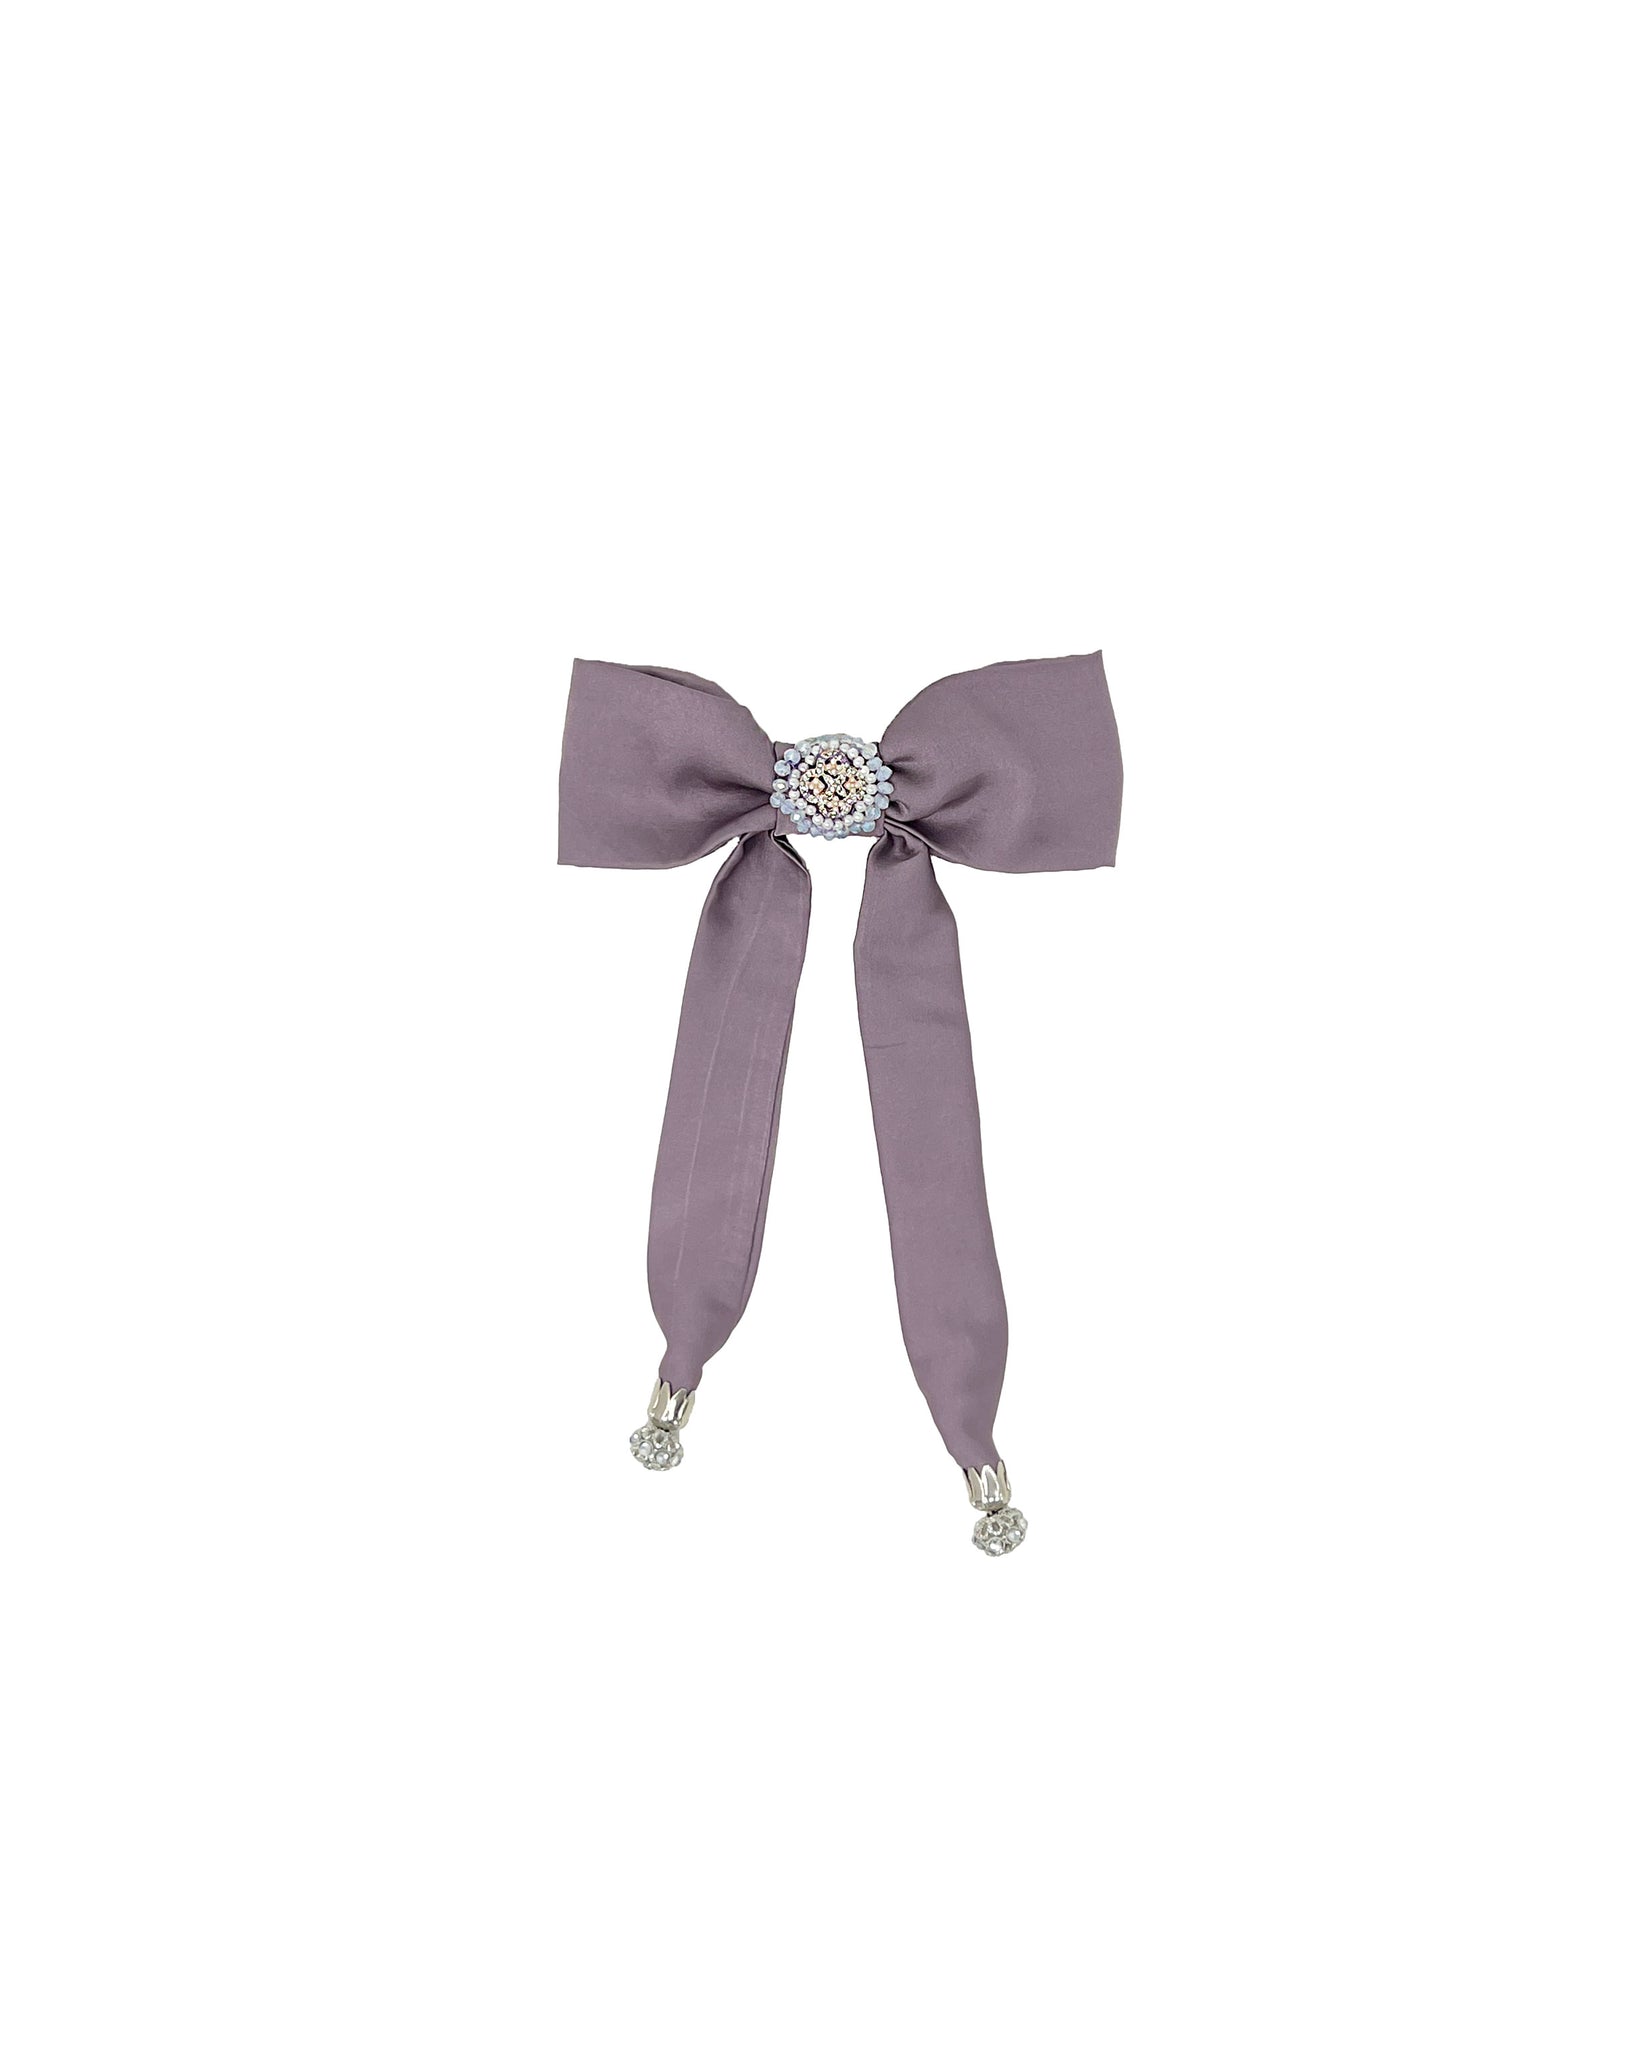 Mauve satin bow clip with embroidered central knot